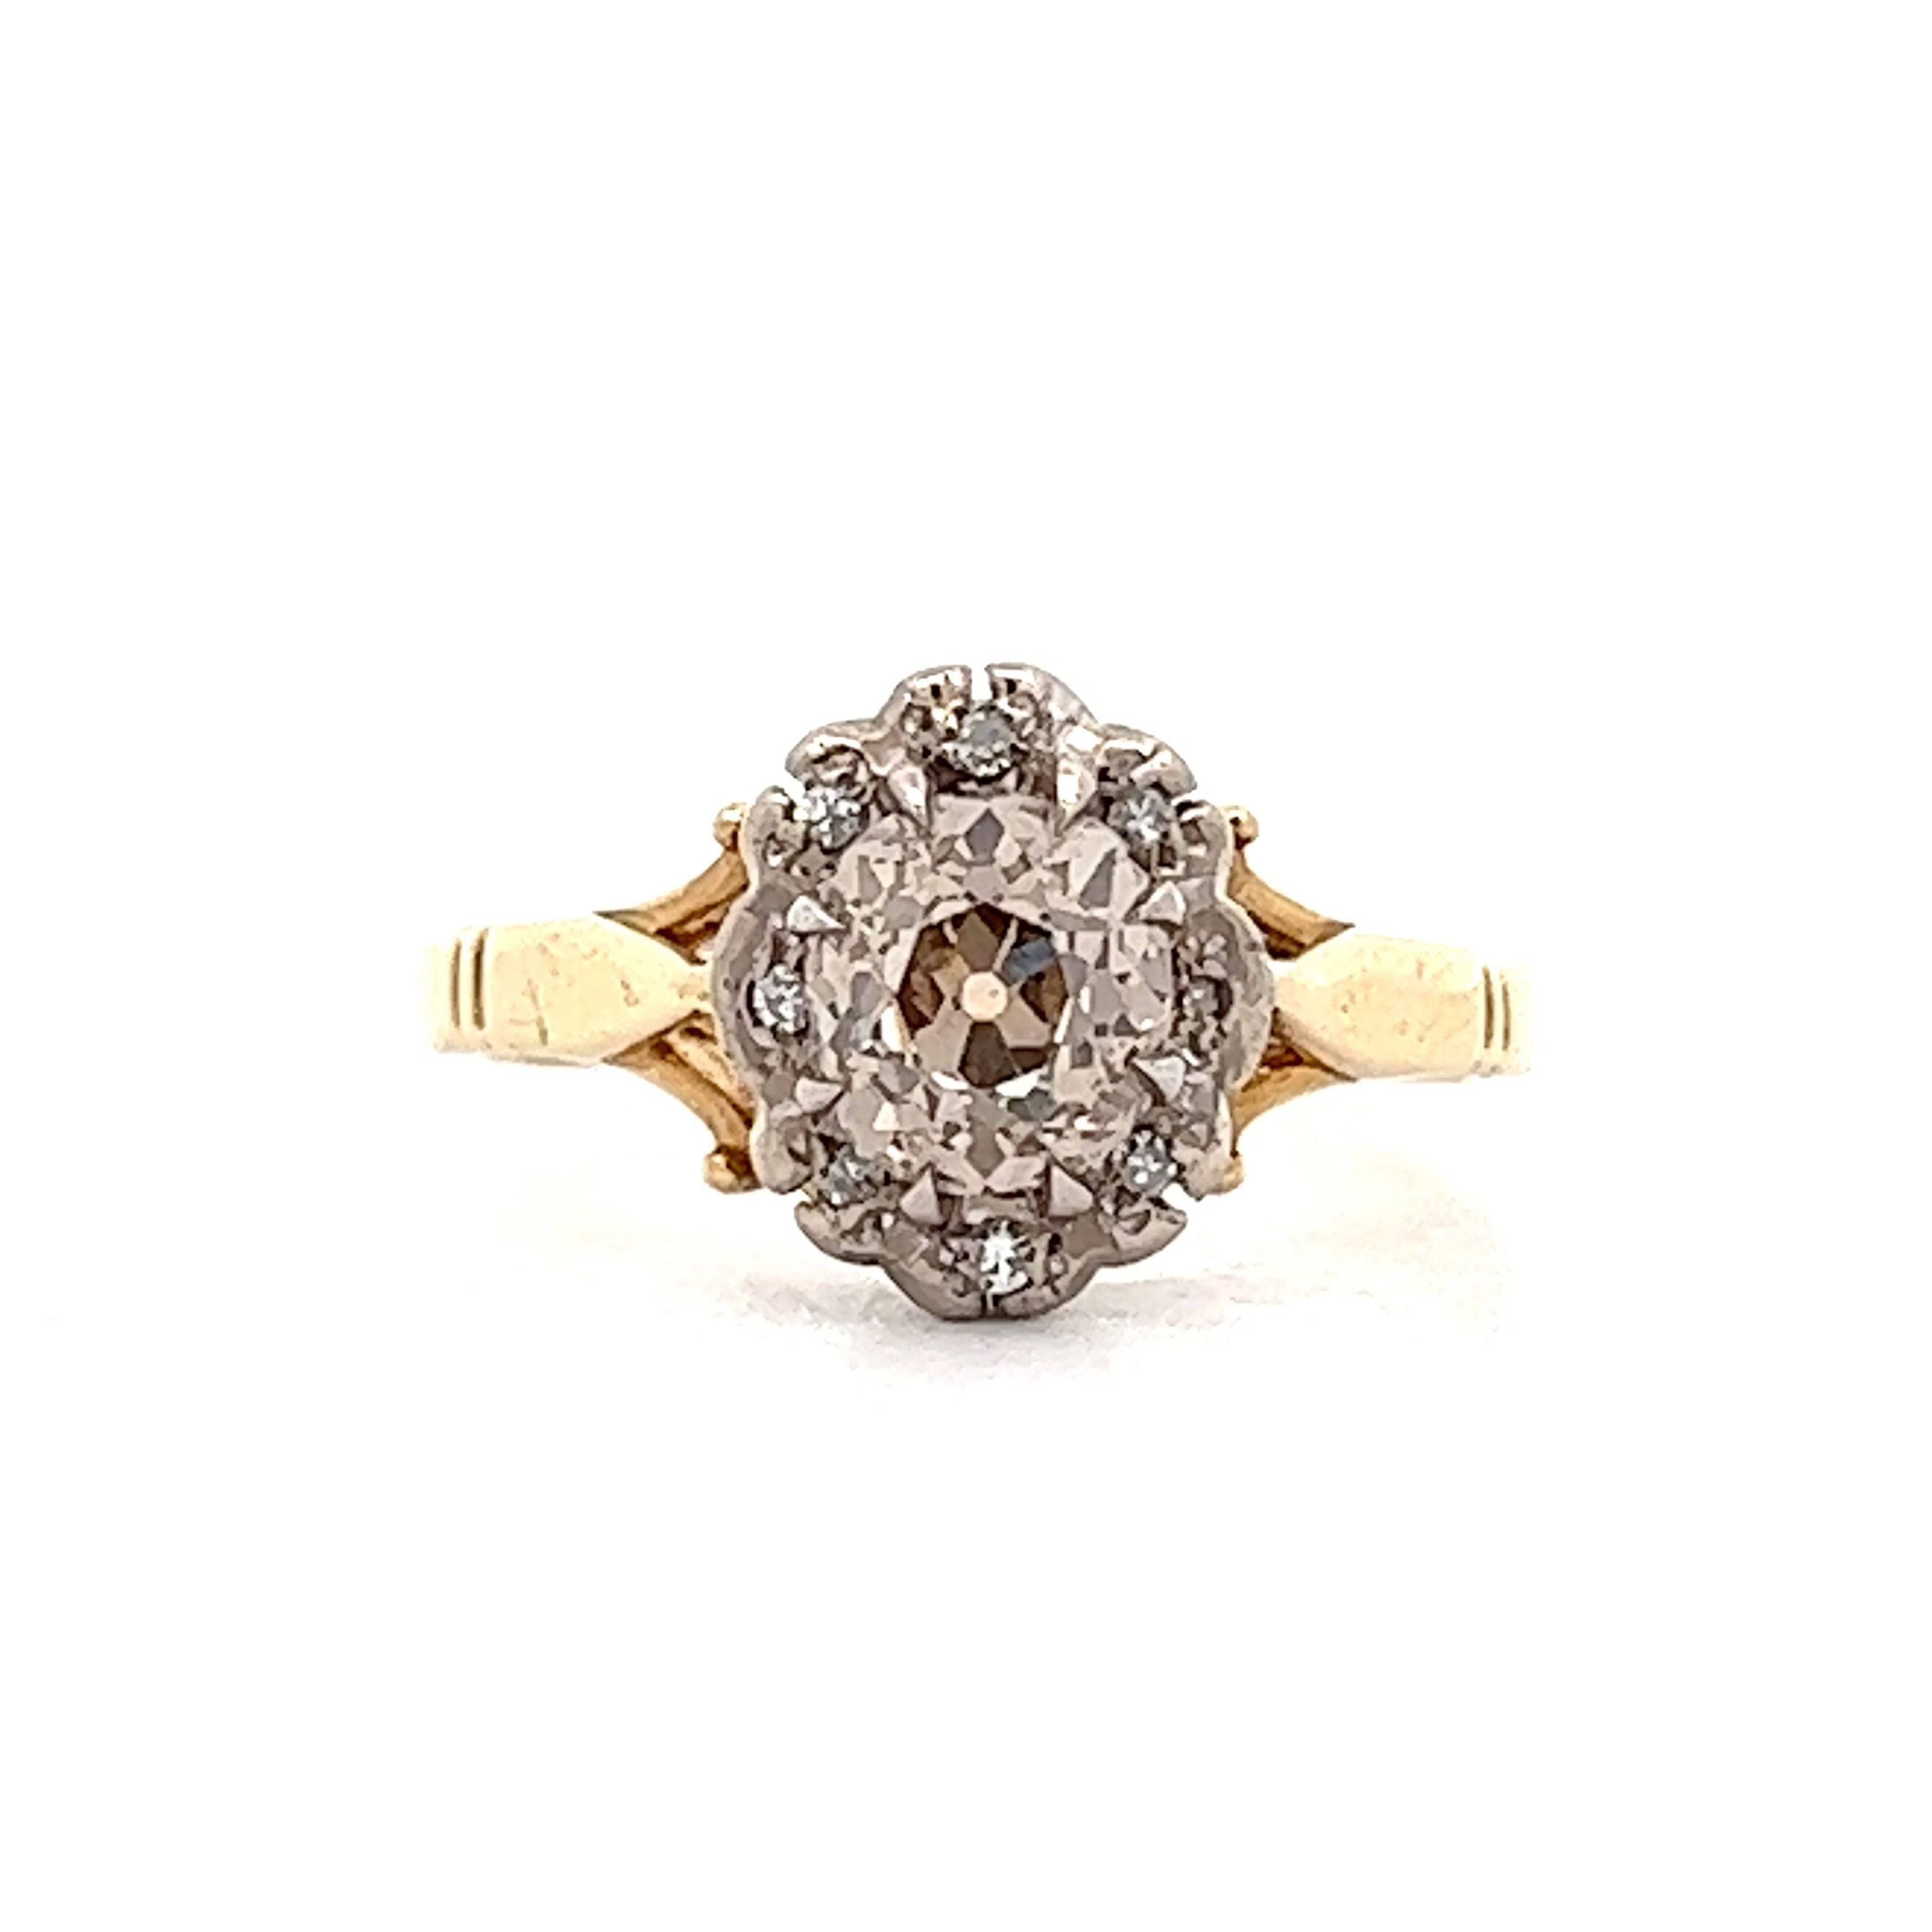 15 antique-style engagement rings you'll love